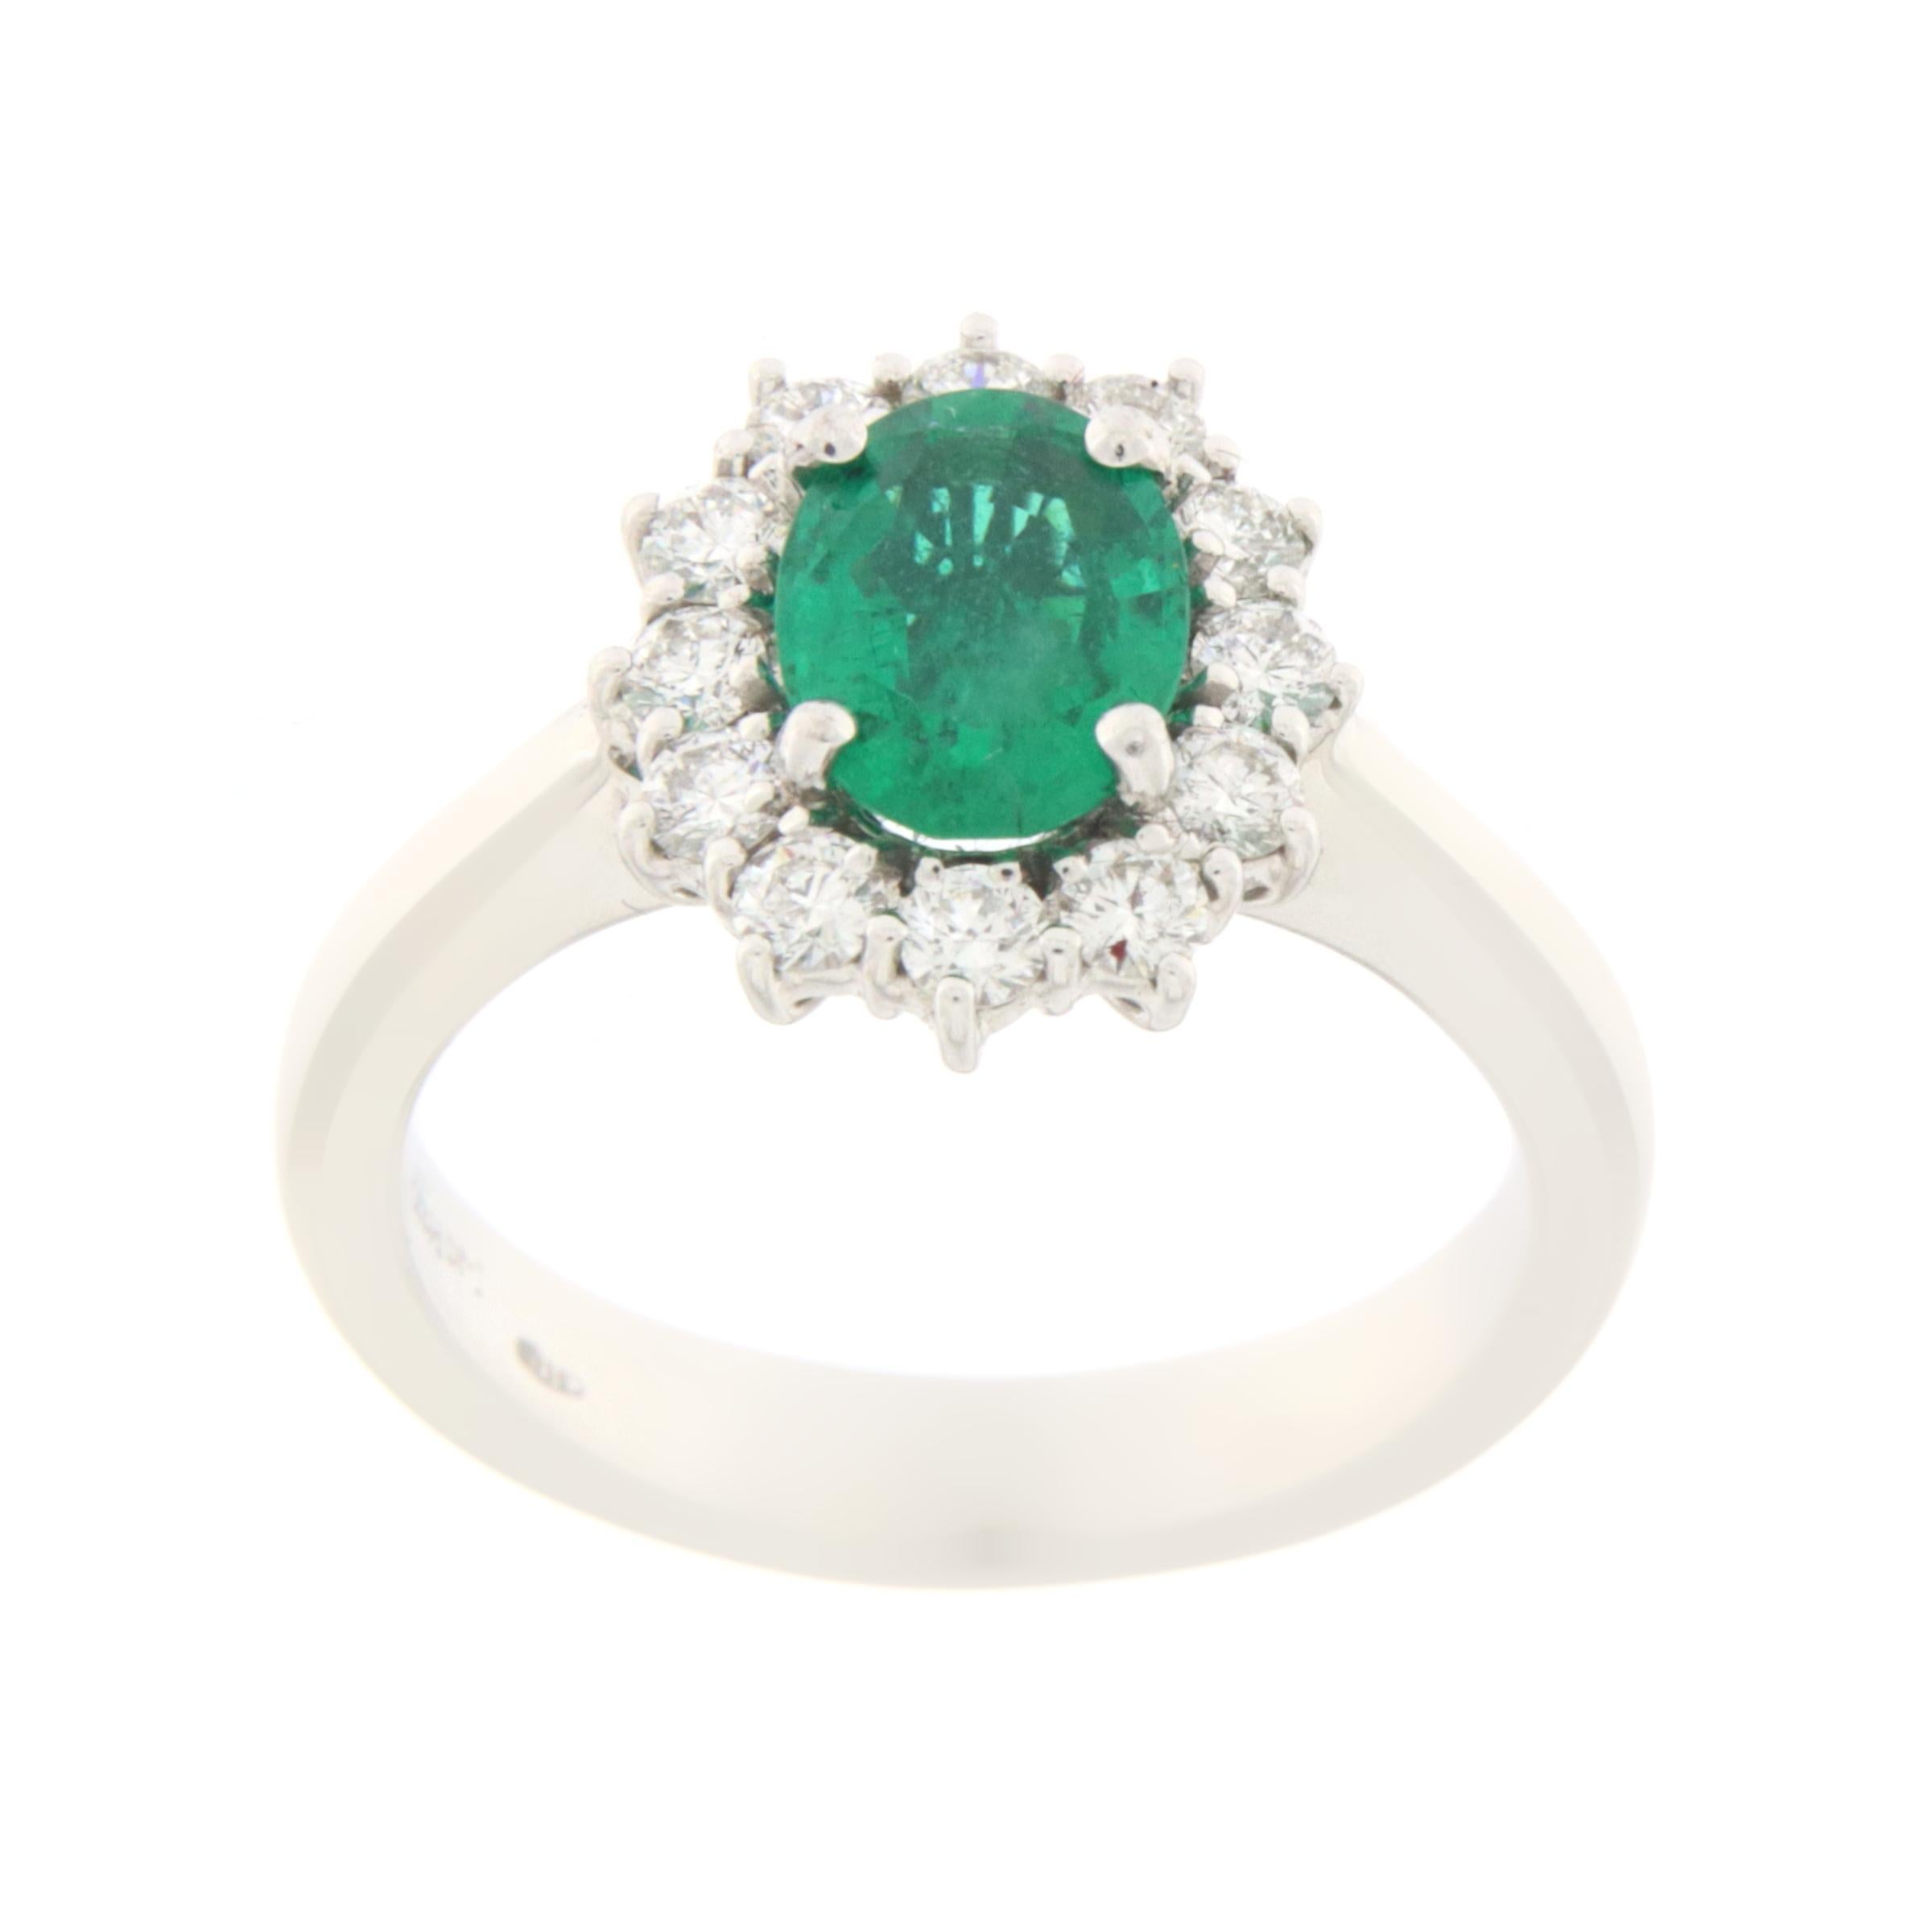 Elegant and sophisticated, this 18-karat white gold ring is a true expression of class and refinement. At the heart of this stunning creation lies a natural emerald, selected for its deep green color and clear brilliance, symbolizing nobility and